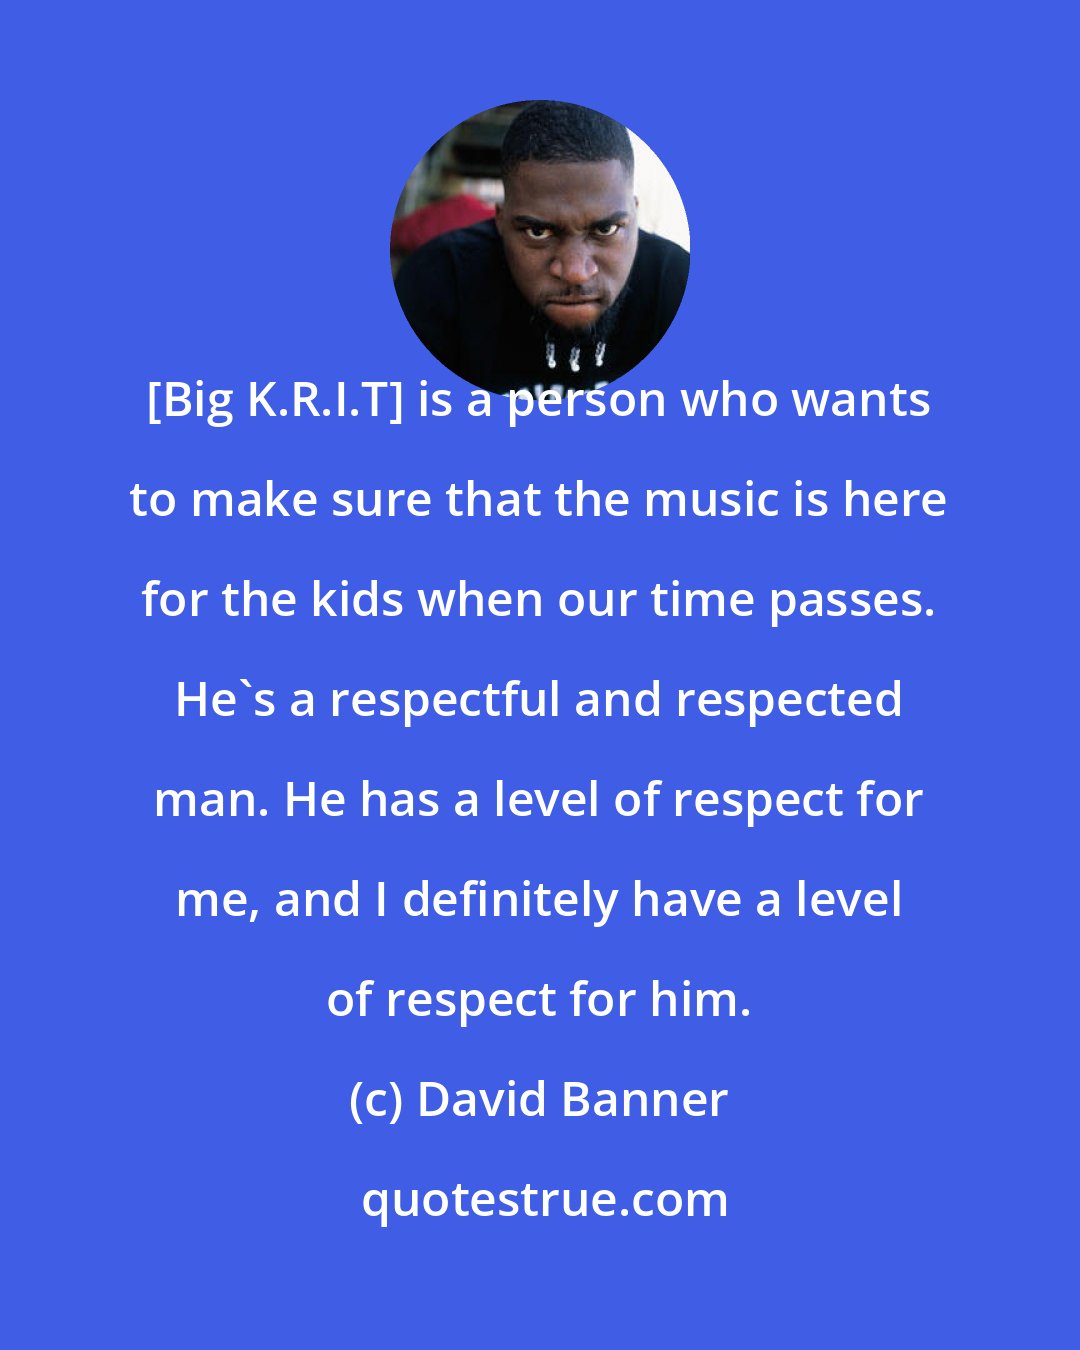 David Banner: [Big K.R.I.T] is a person who wants to make sure that the music is here for the kids when our time passes. He's a respectful and respected man. He has a level of respect for me, and I definitely have a level of respect for him.